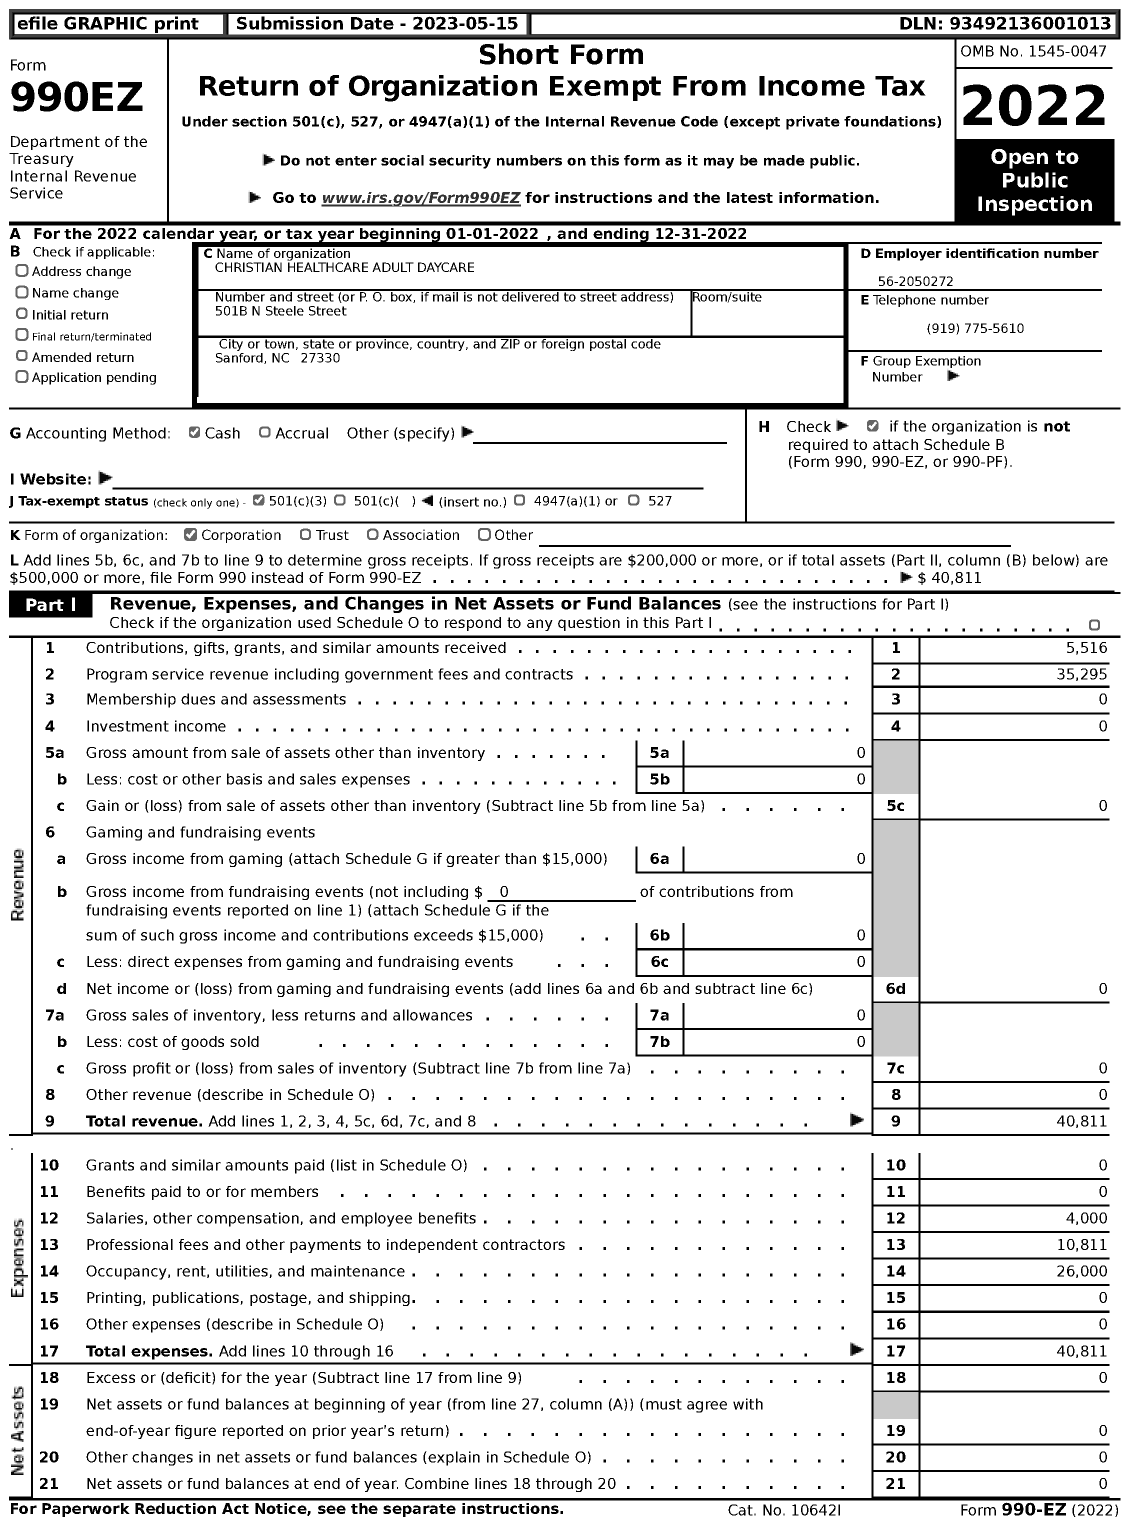 Image of first page of 2022 Form 990EZ for Christian Healthcare Adult Daycare